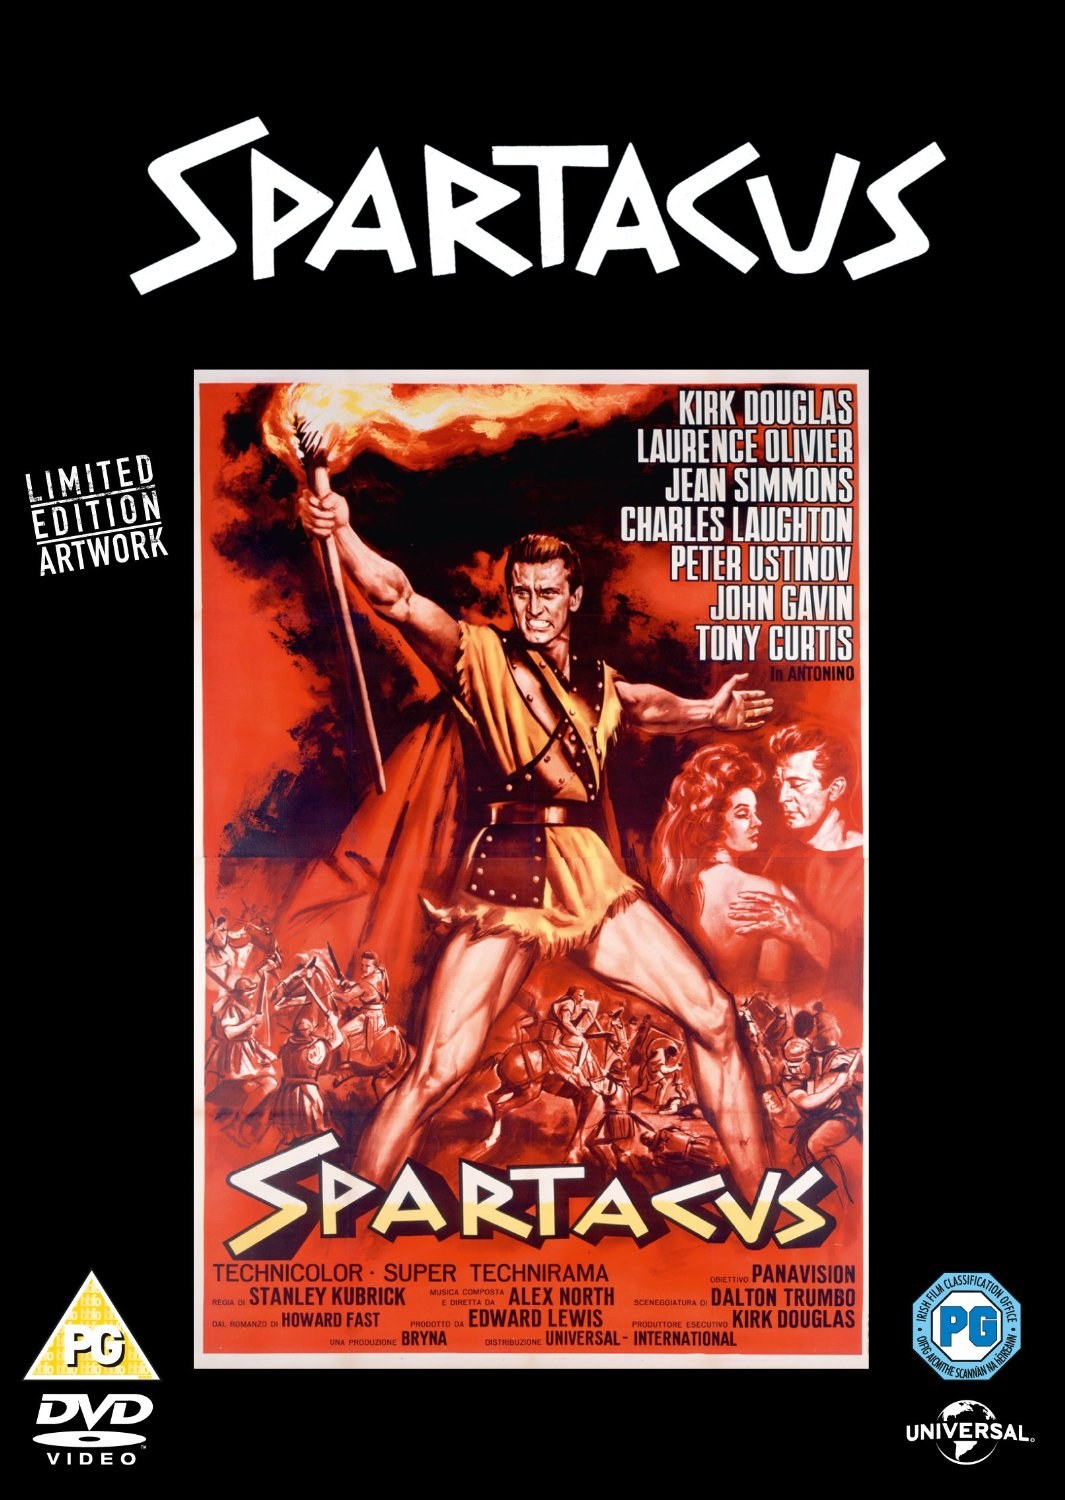 Spartacus DVD – Original Poster Series featuring limited edition artwork with Kirk Douglas